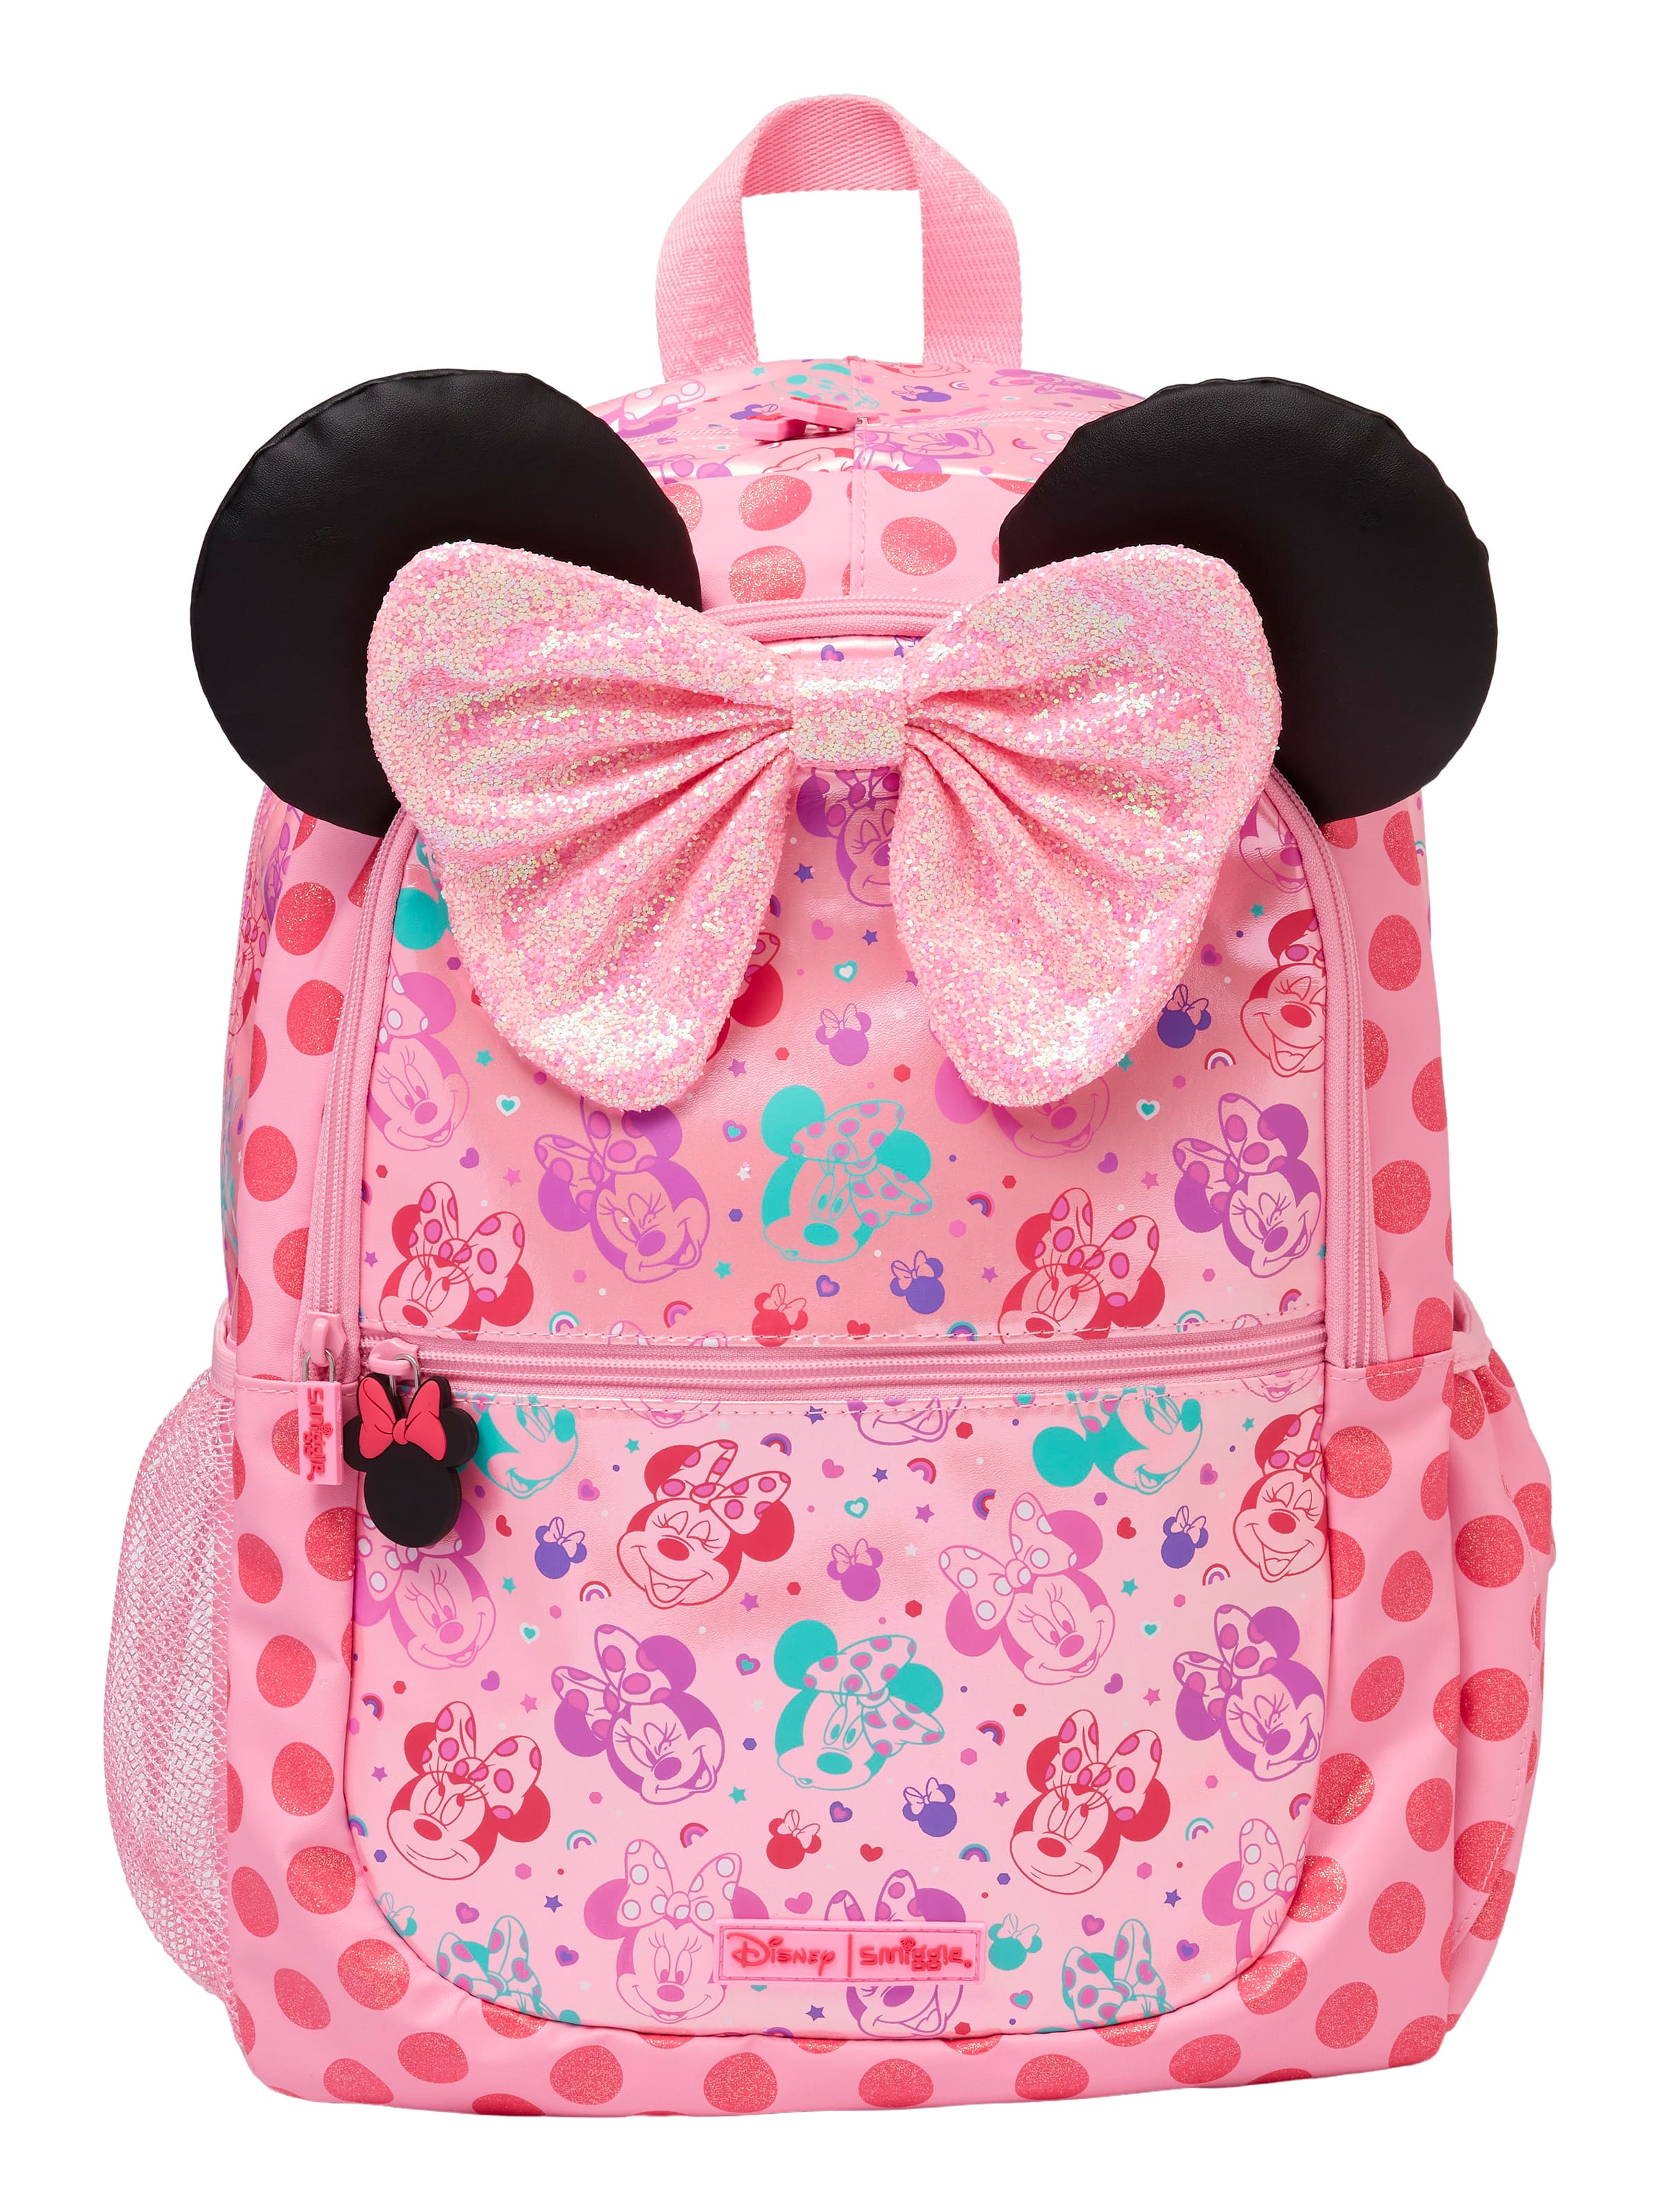 Minnie Mouse Bags